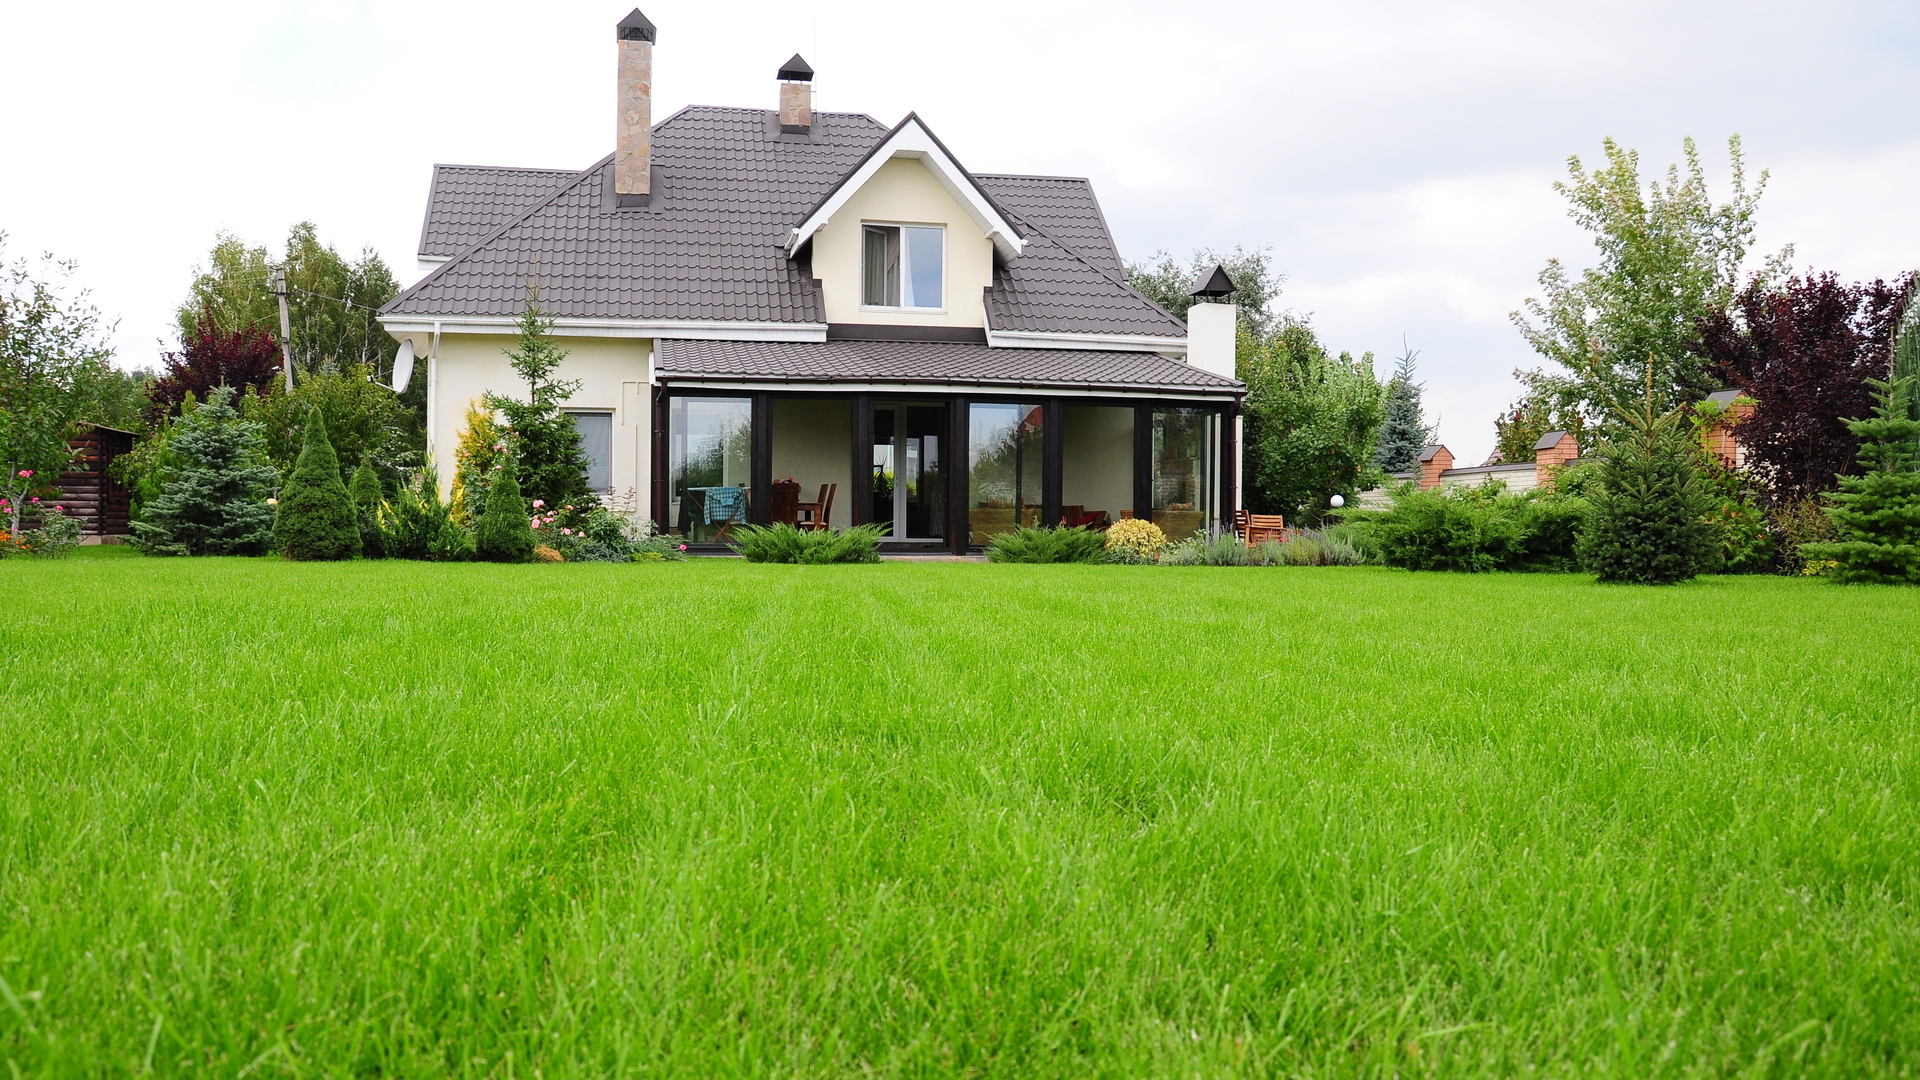 Sod vs Seed - Which Option Is Better for Establishing a New Lawn?